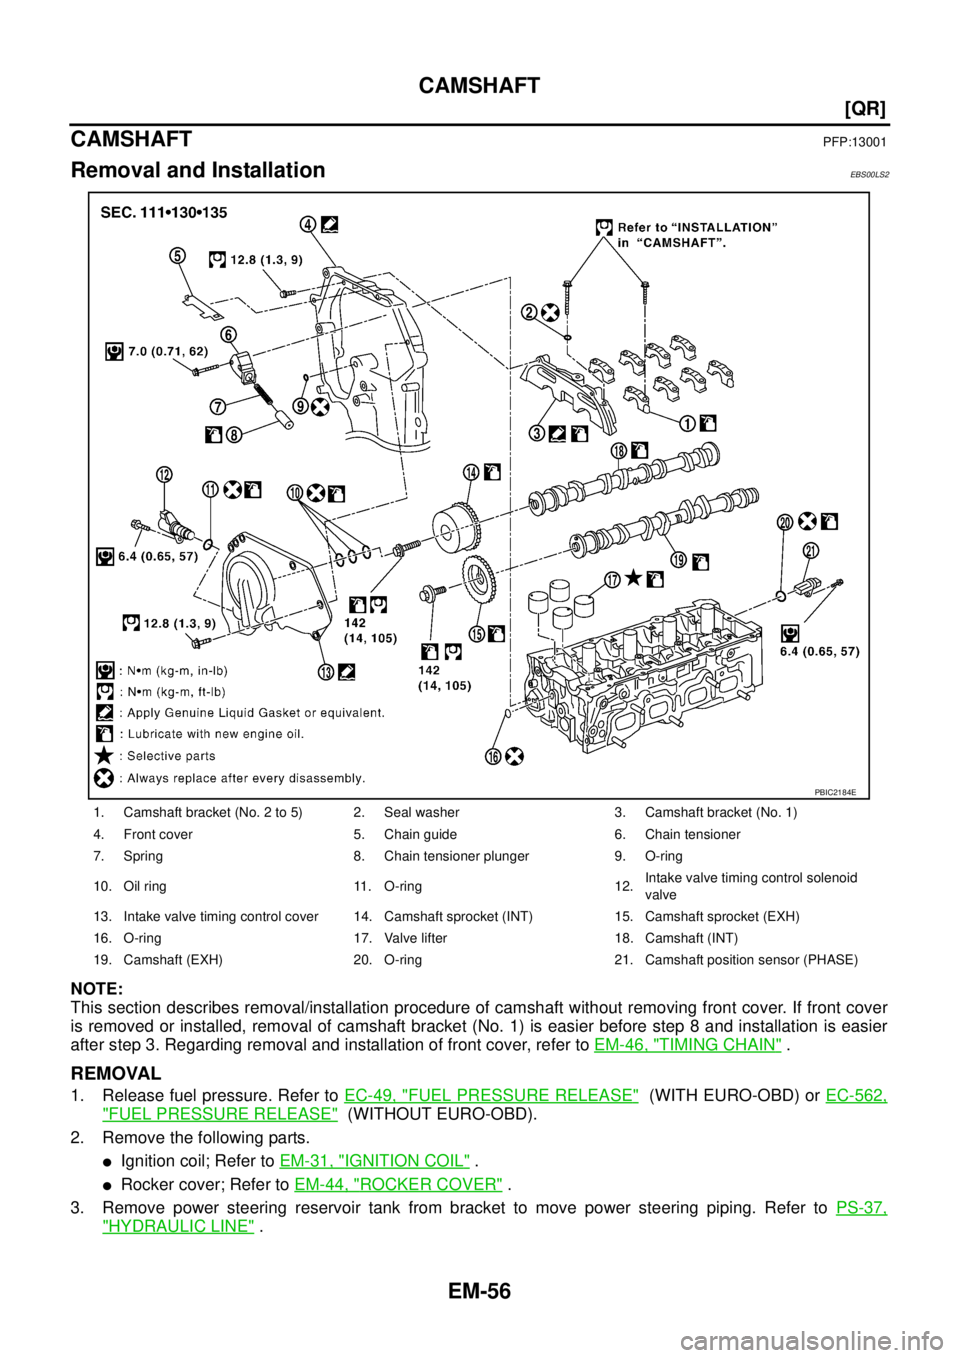 NISSAN X-TRAIL 2005  Service Repair Manual EM-56
[QR]
CAMSHAFT
 
CAMSHAFTPFP:13001
Removal and InstallationEBS00LS2
NOTE:
This section describes removal/installation procedure of camshaft without removing front cover. If front cover
is removed